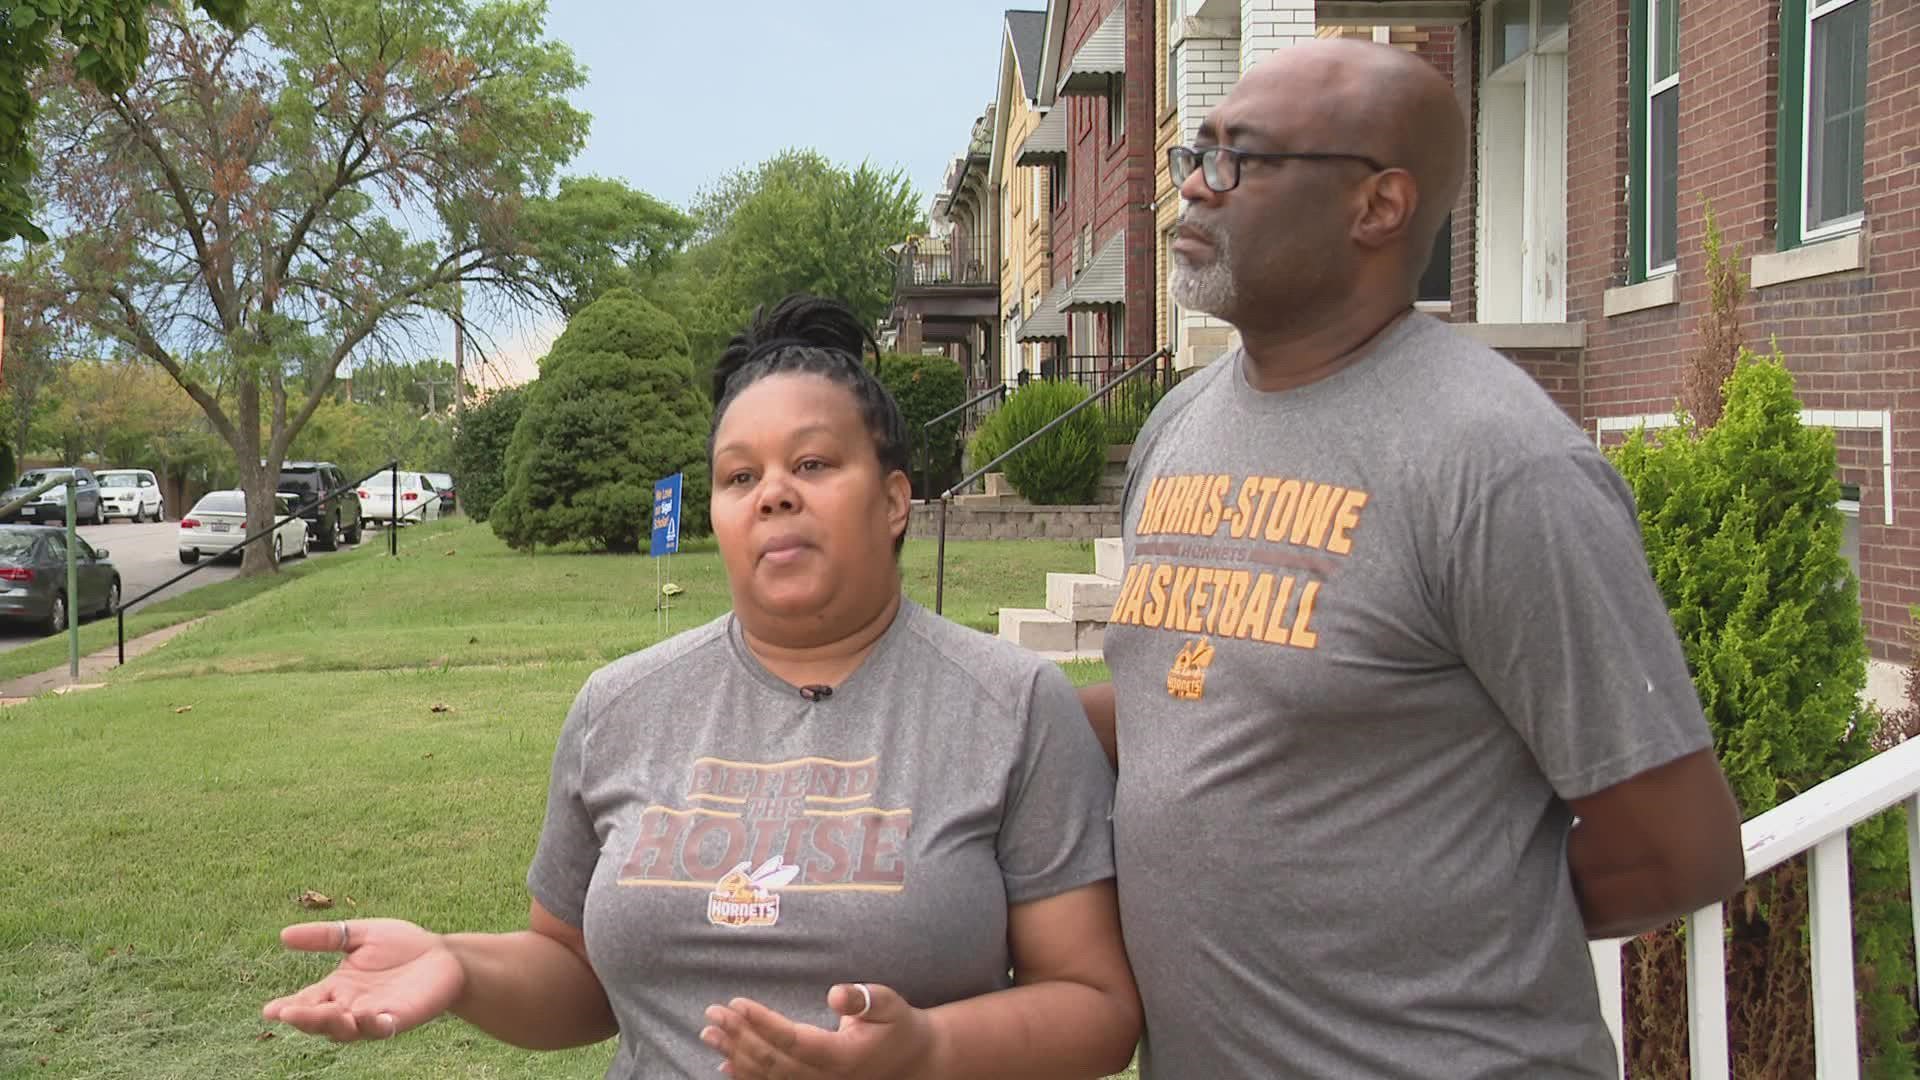 Hours after a married couple moved from Kansas to Tower Grove South, their U-Haul filled with appliances, furniture and family pictures was stolen.